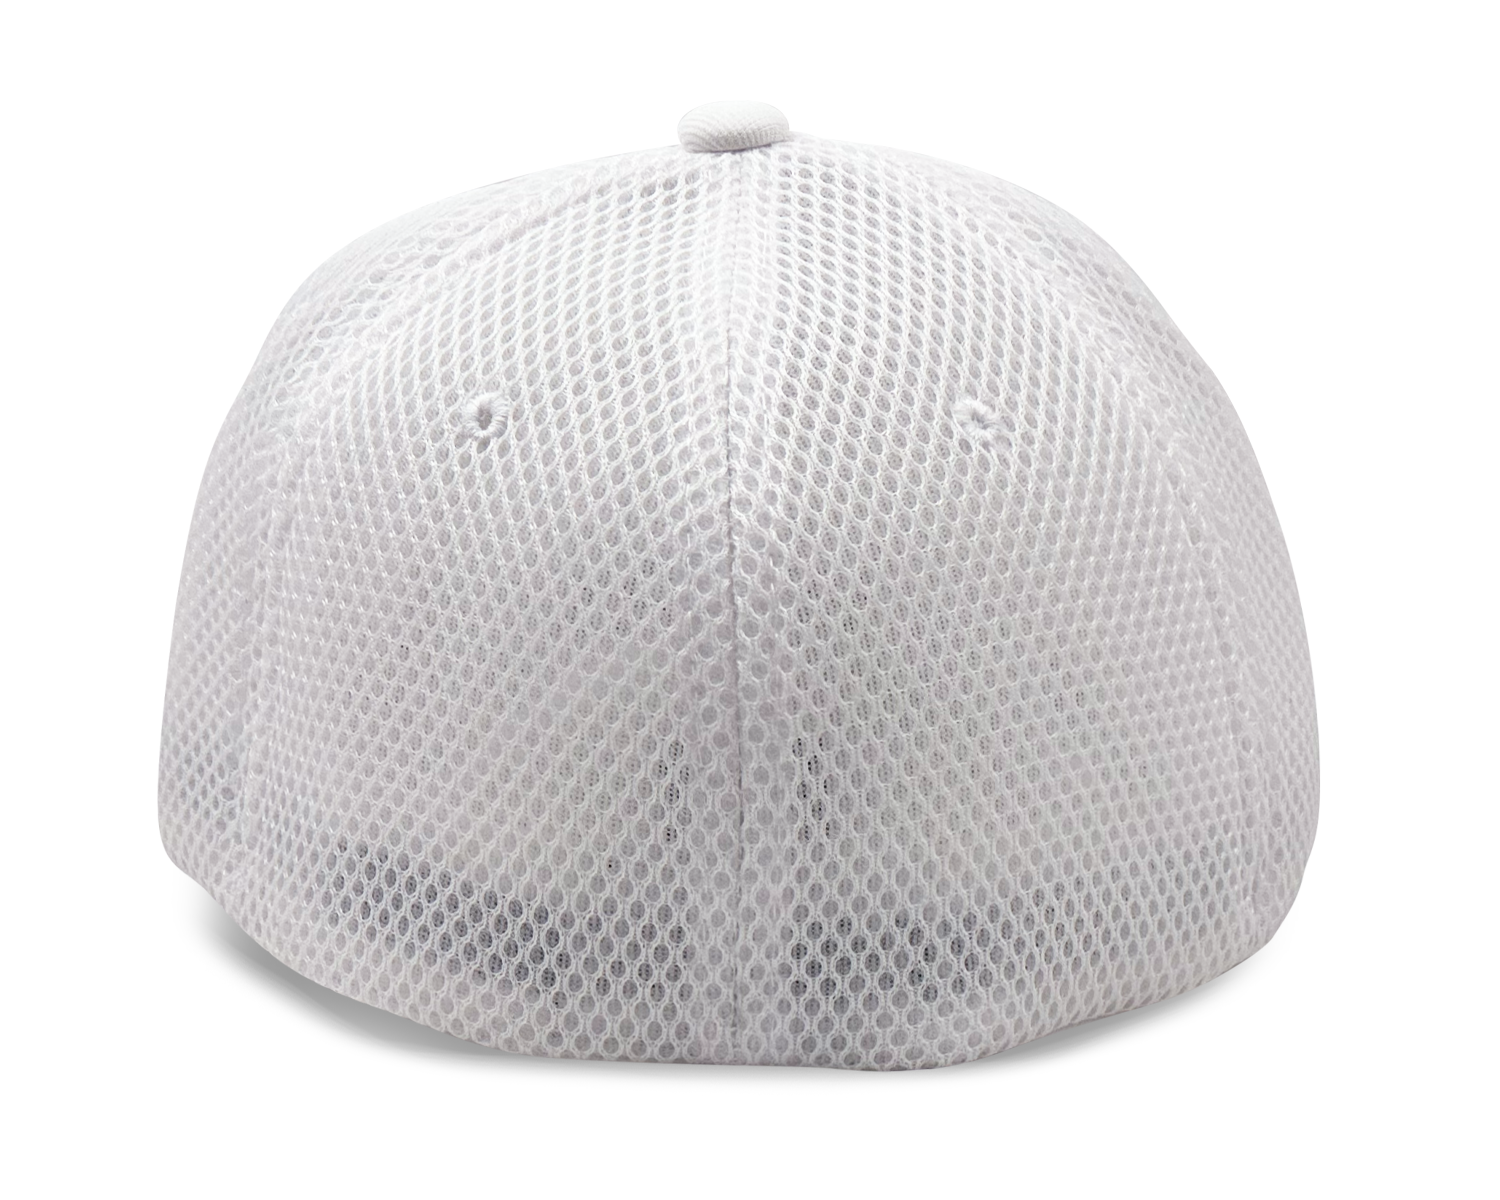 L2K 9002 Hybrid Stretch-Fitted Trucker Cap with Air Mesh (2 Pack)